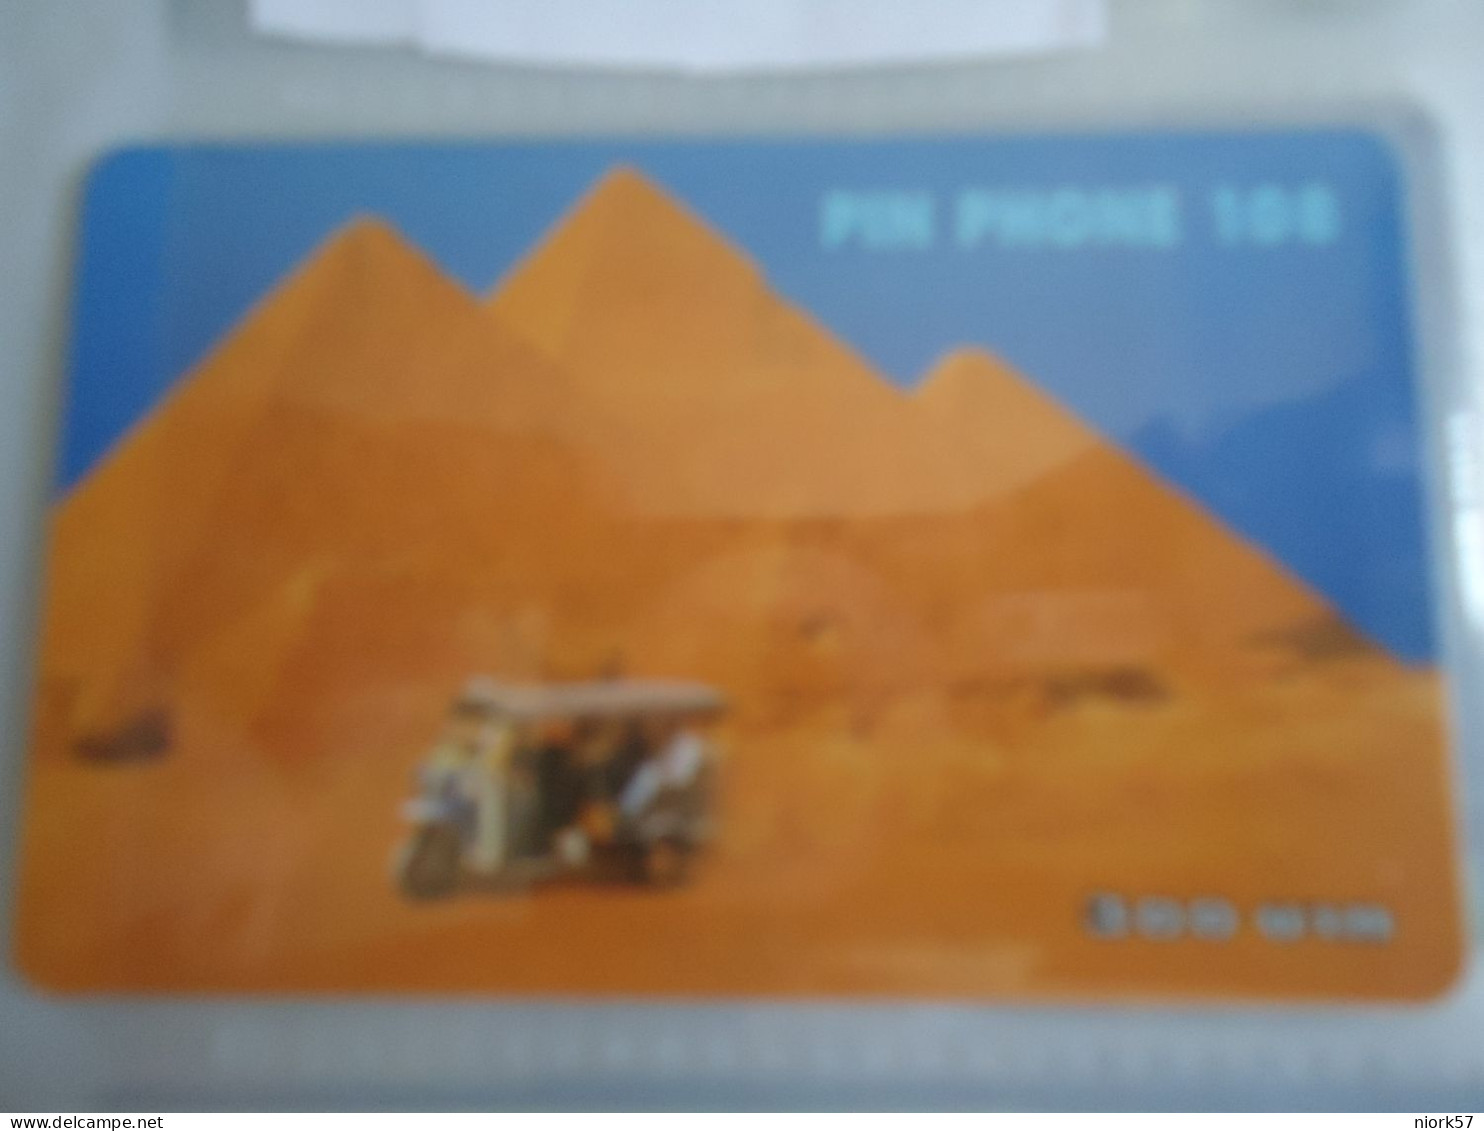 THAILAND USED CARDS PIN 108 WORLD HERITAGES  EGYPT PYRAMIDES - Landscapes